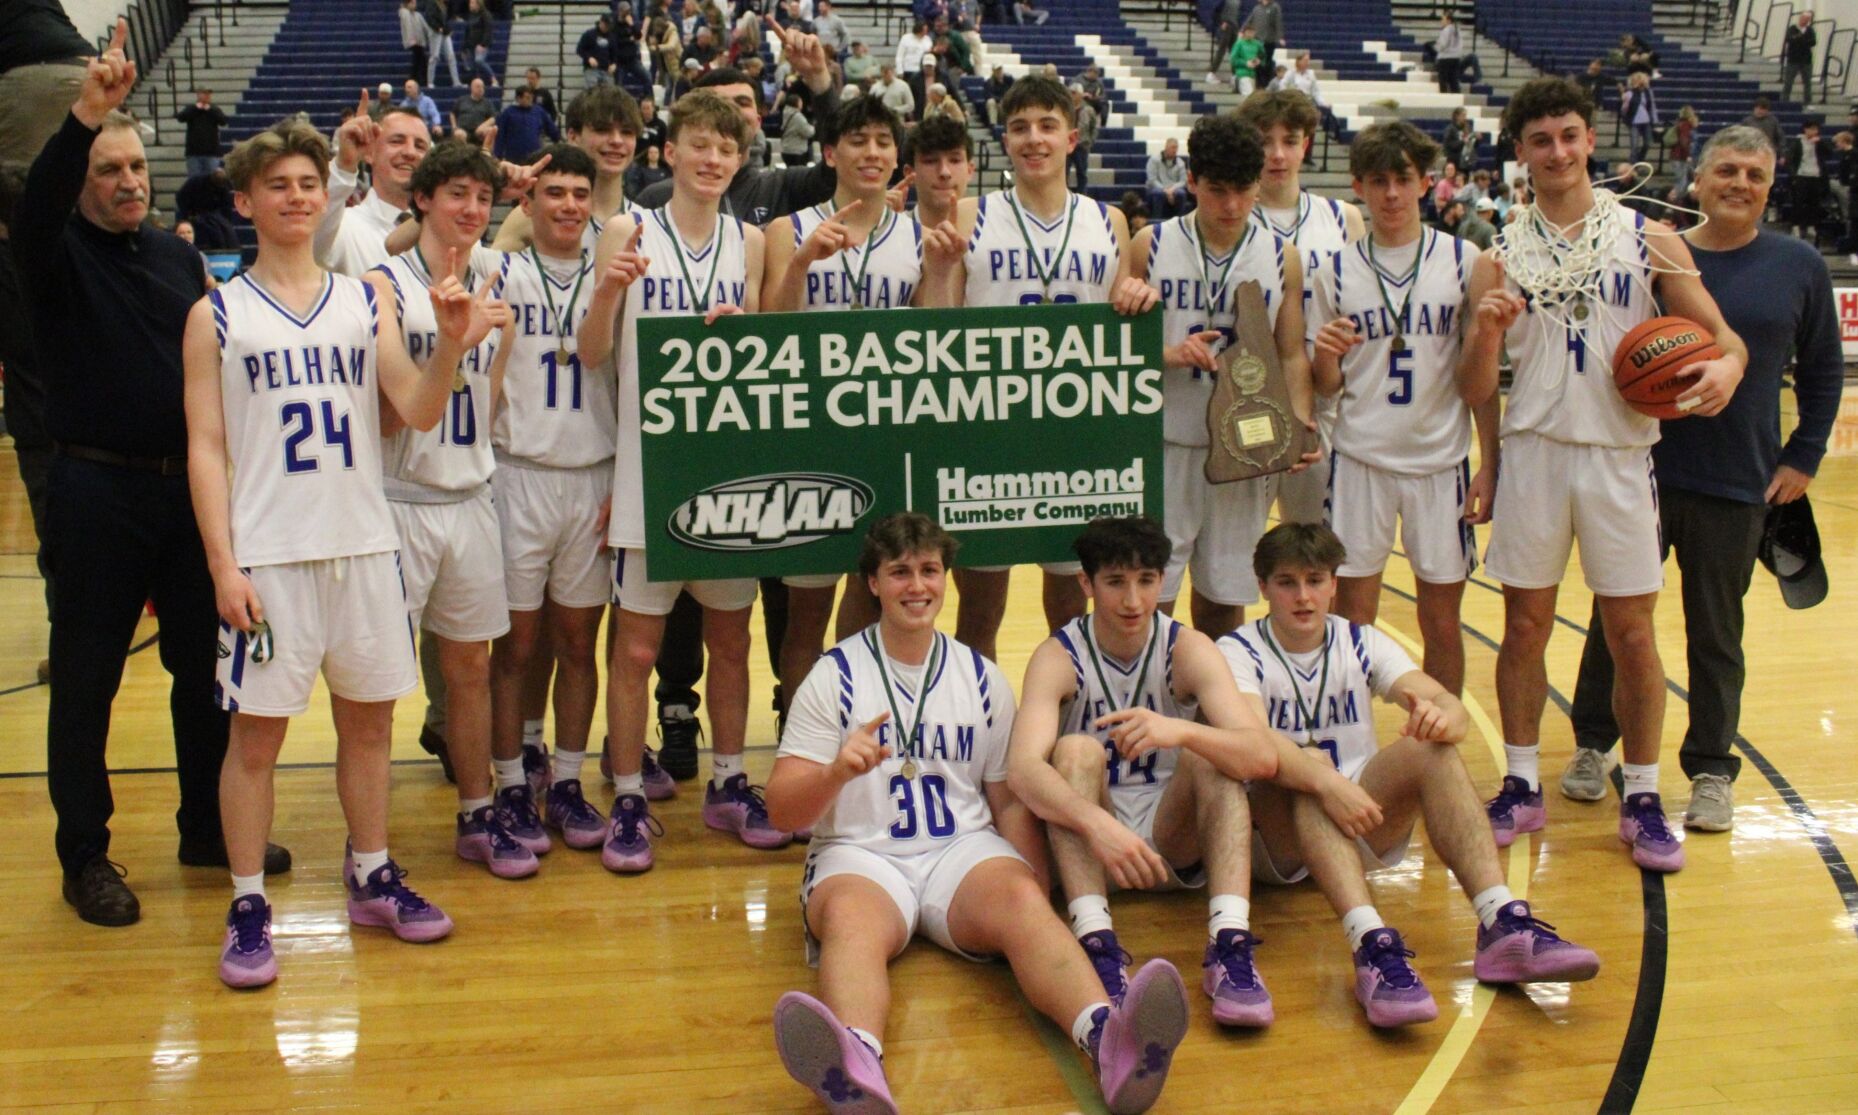 Pelham High Wins Back-to-Back Division II State Basketball Titles with Dominant Fourth Quarter Performance